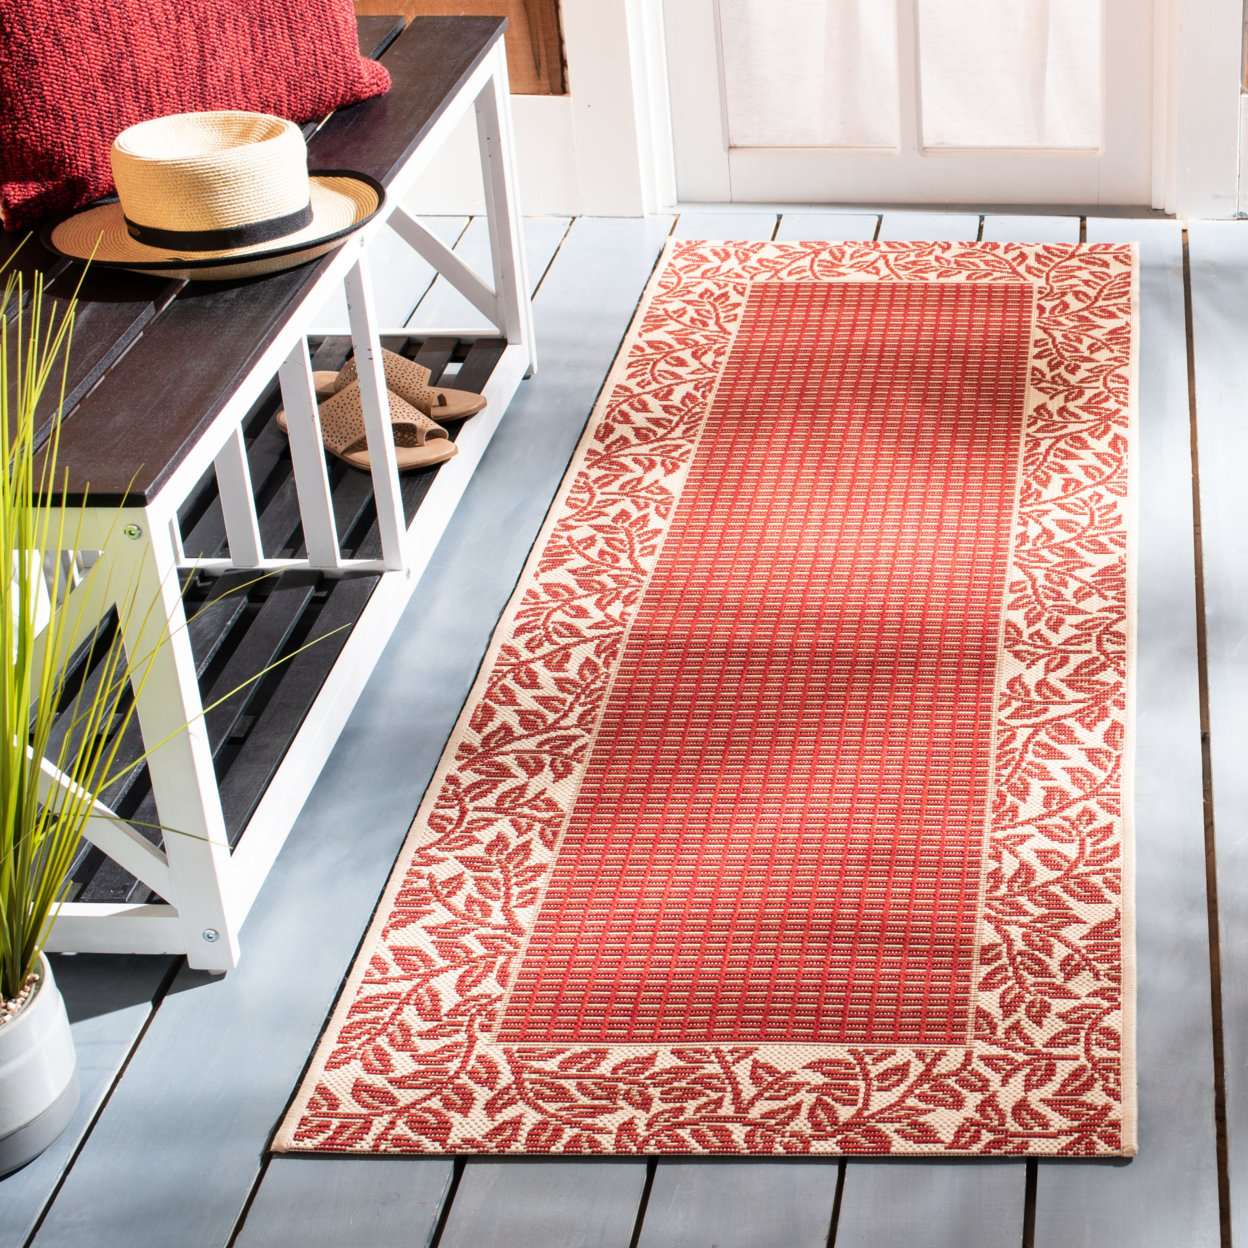 SAFAVIEH Courtyard CY0727-3707 Red / Natural Rug - 6' 7 X 9' 6